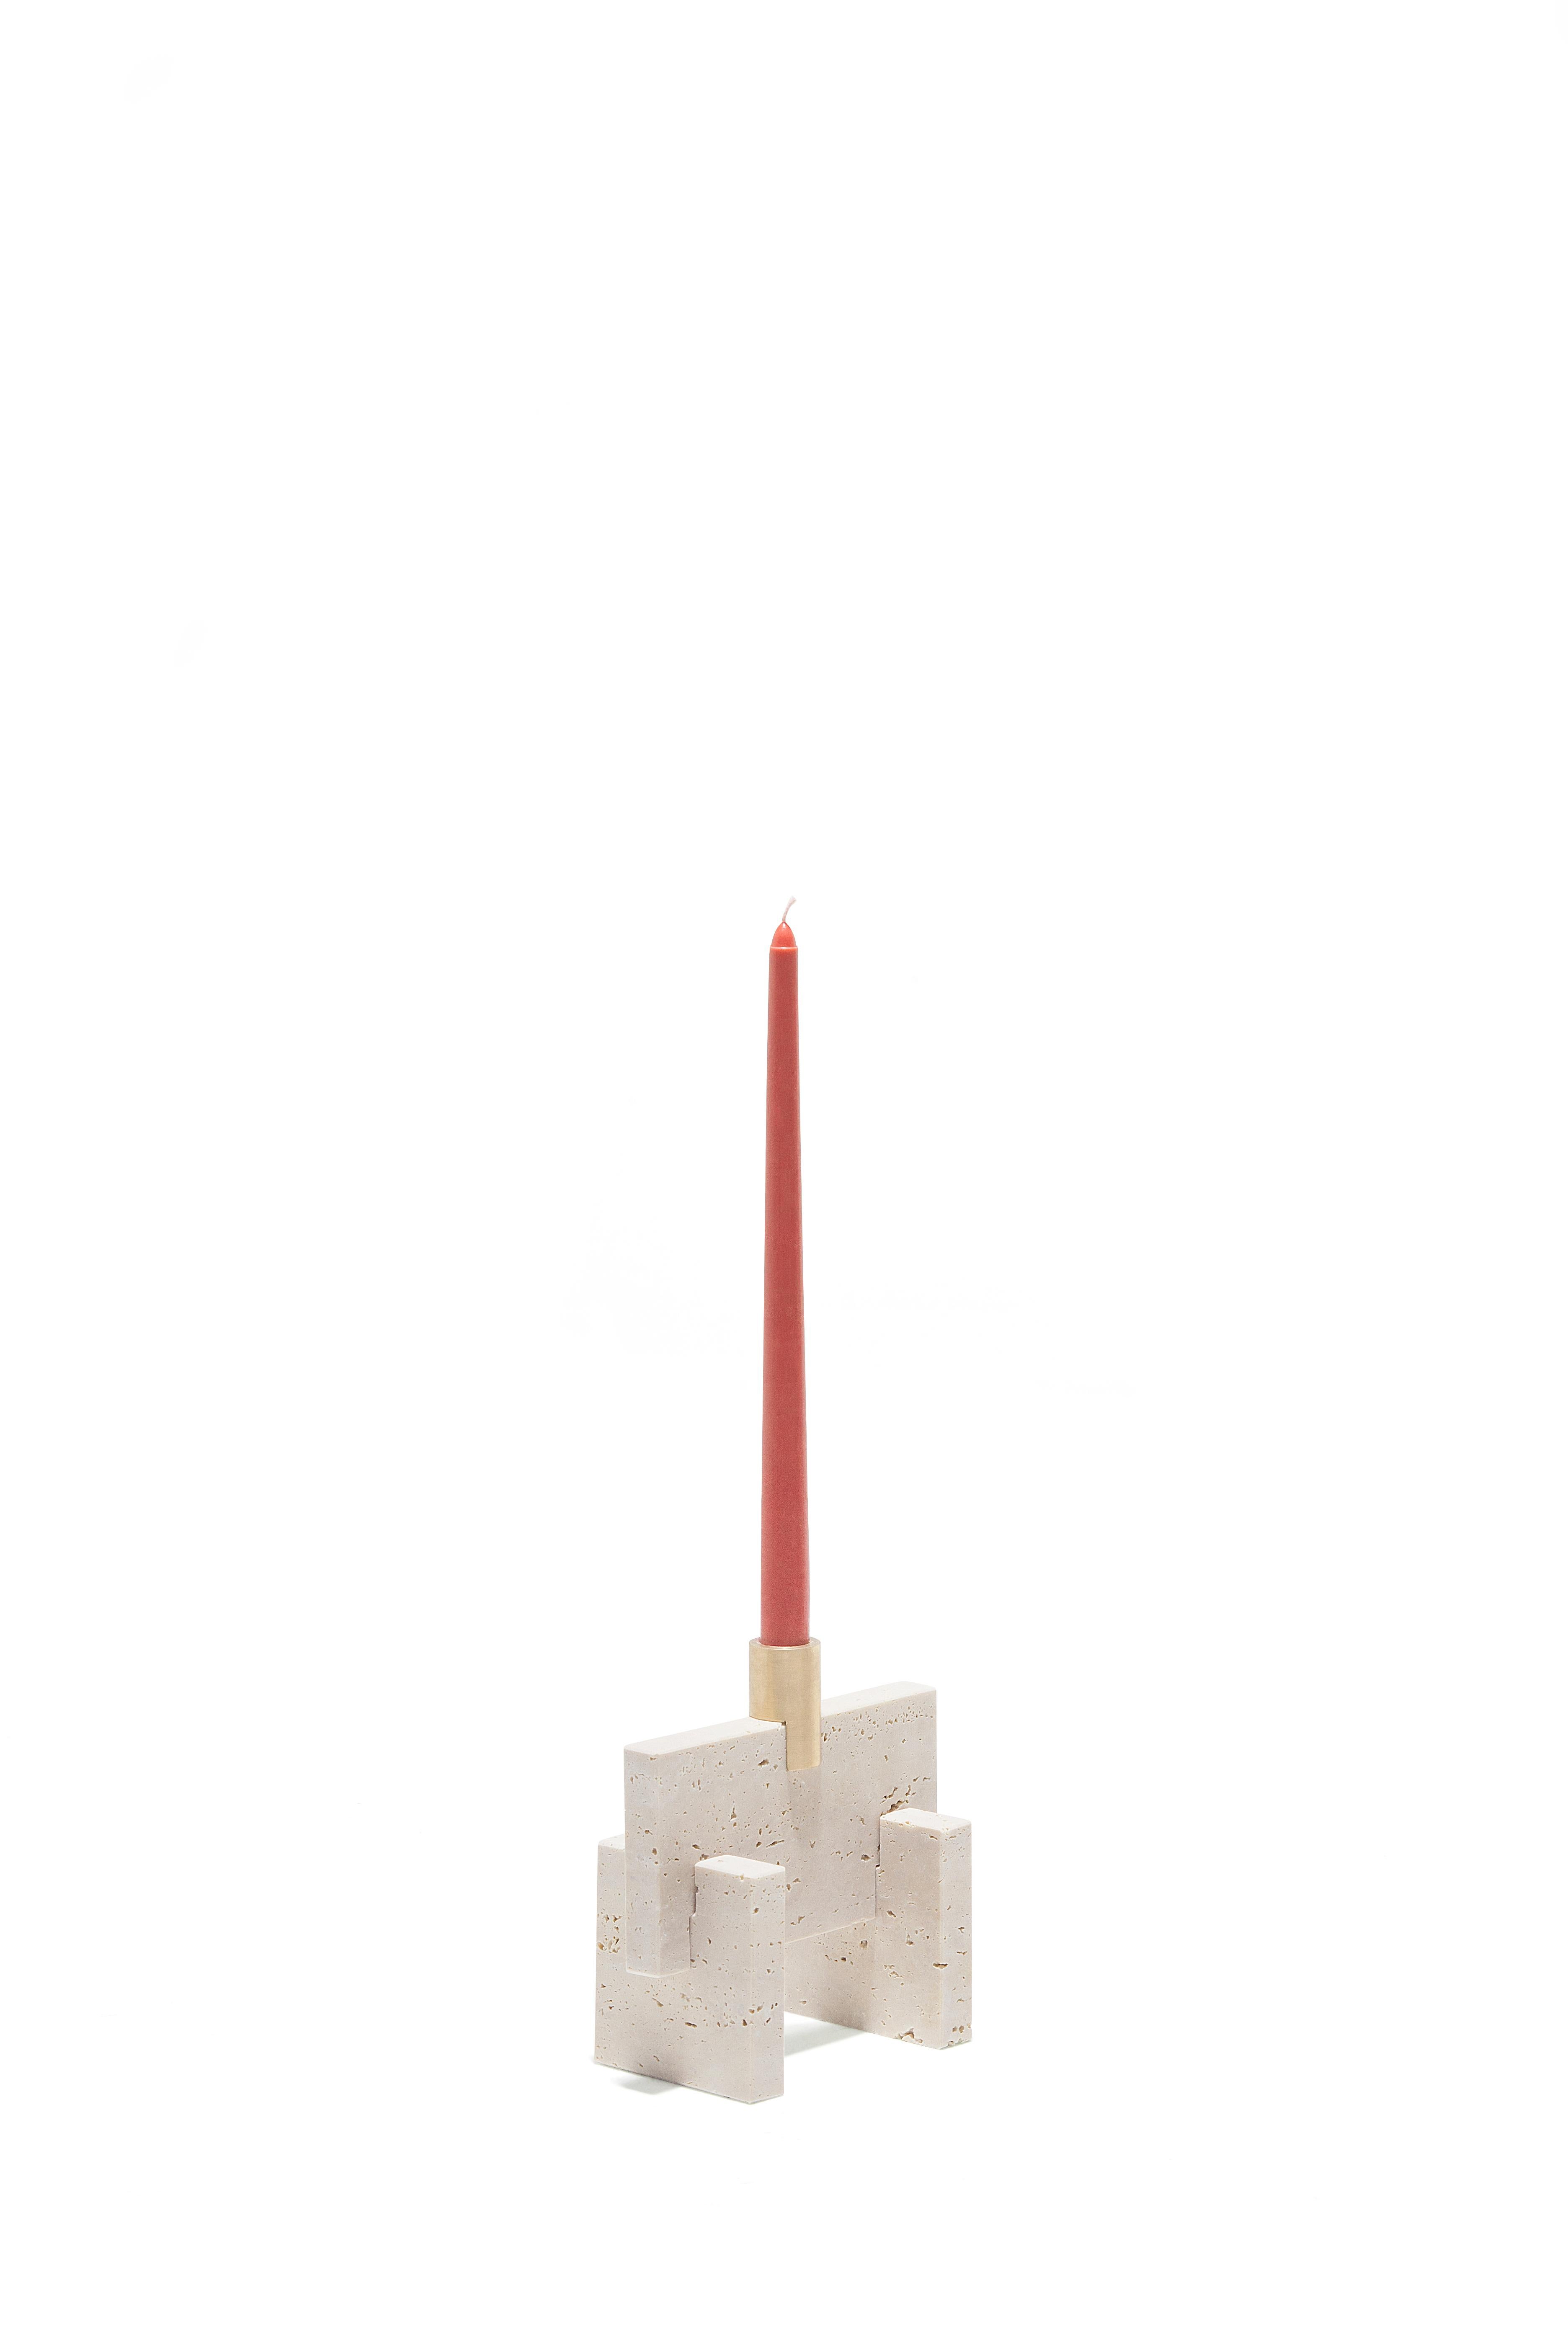 The Fit Candle One is a minimalist style candle holder made of treated Travertine marble. This candle holder is composed by three marble pieces and a solid brass piece, all of them assembled in a logical and harmonious way.
Josep Vila Capdevila,